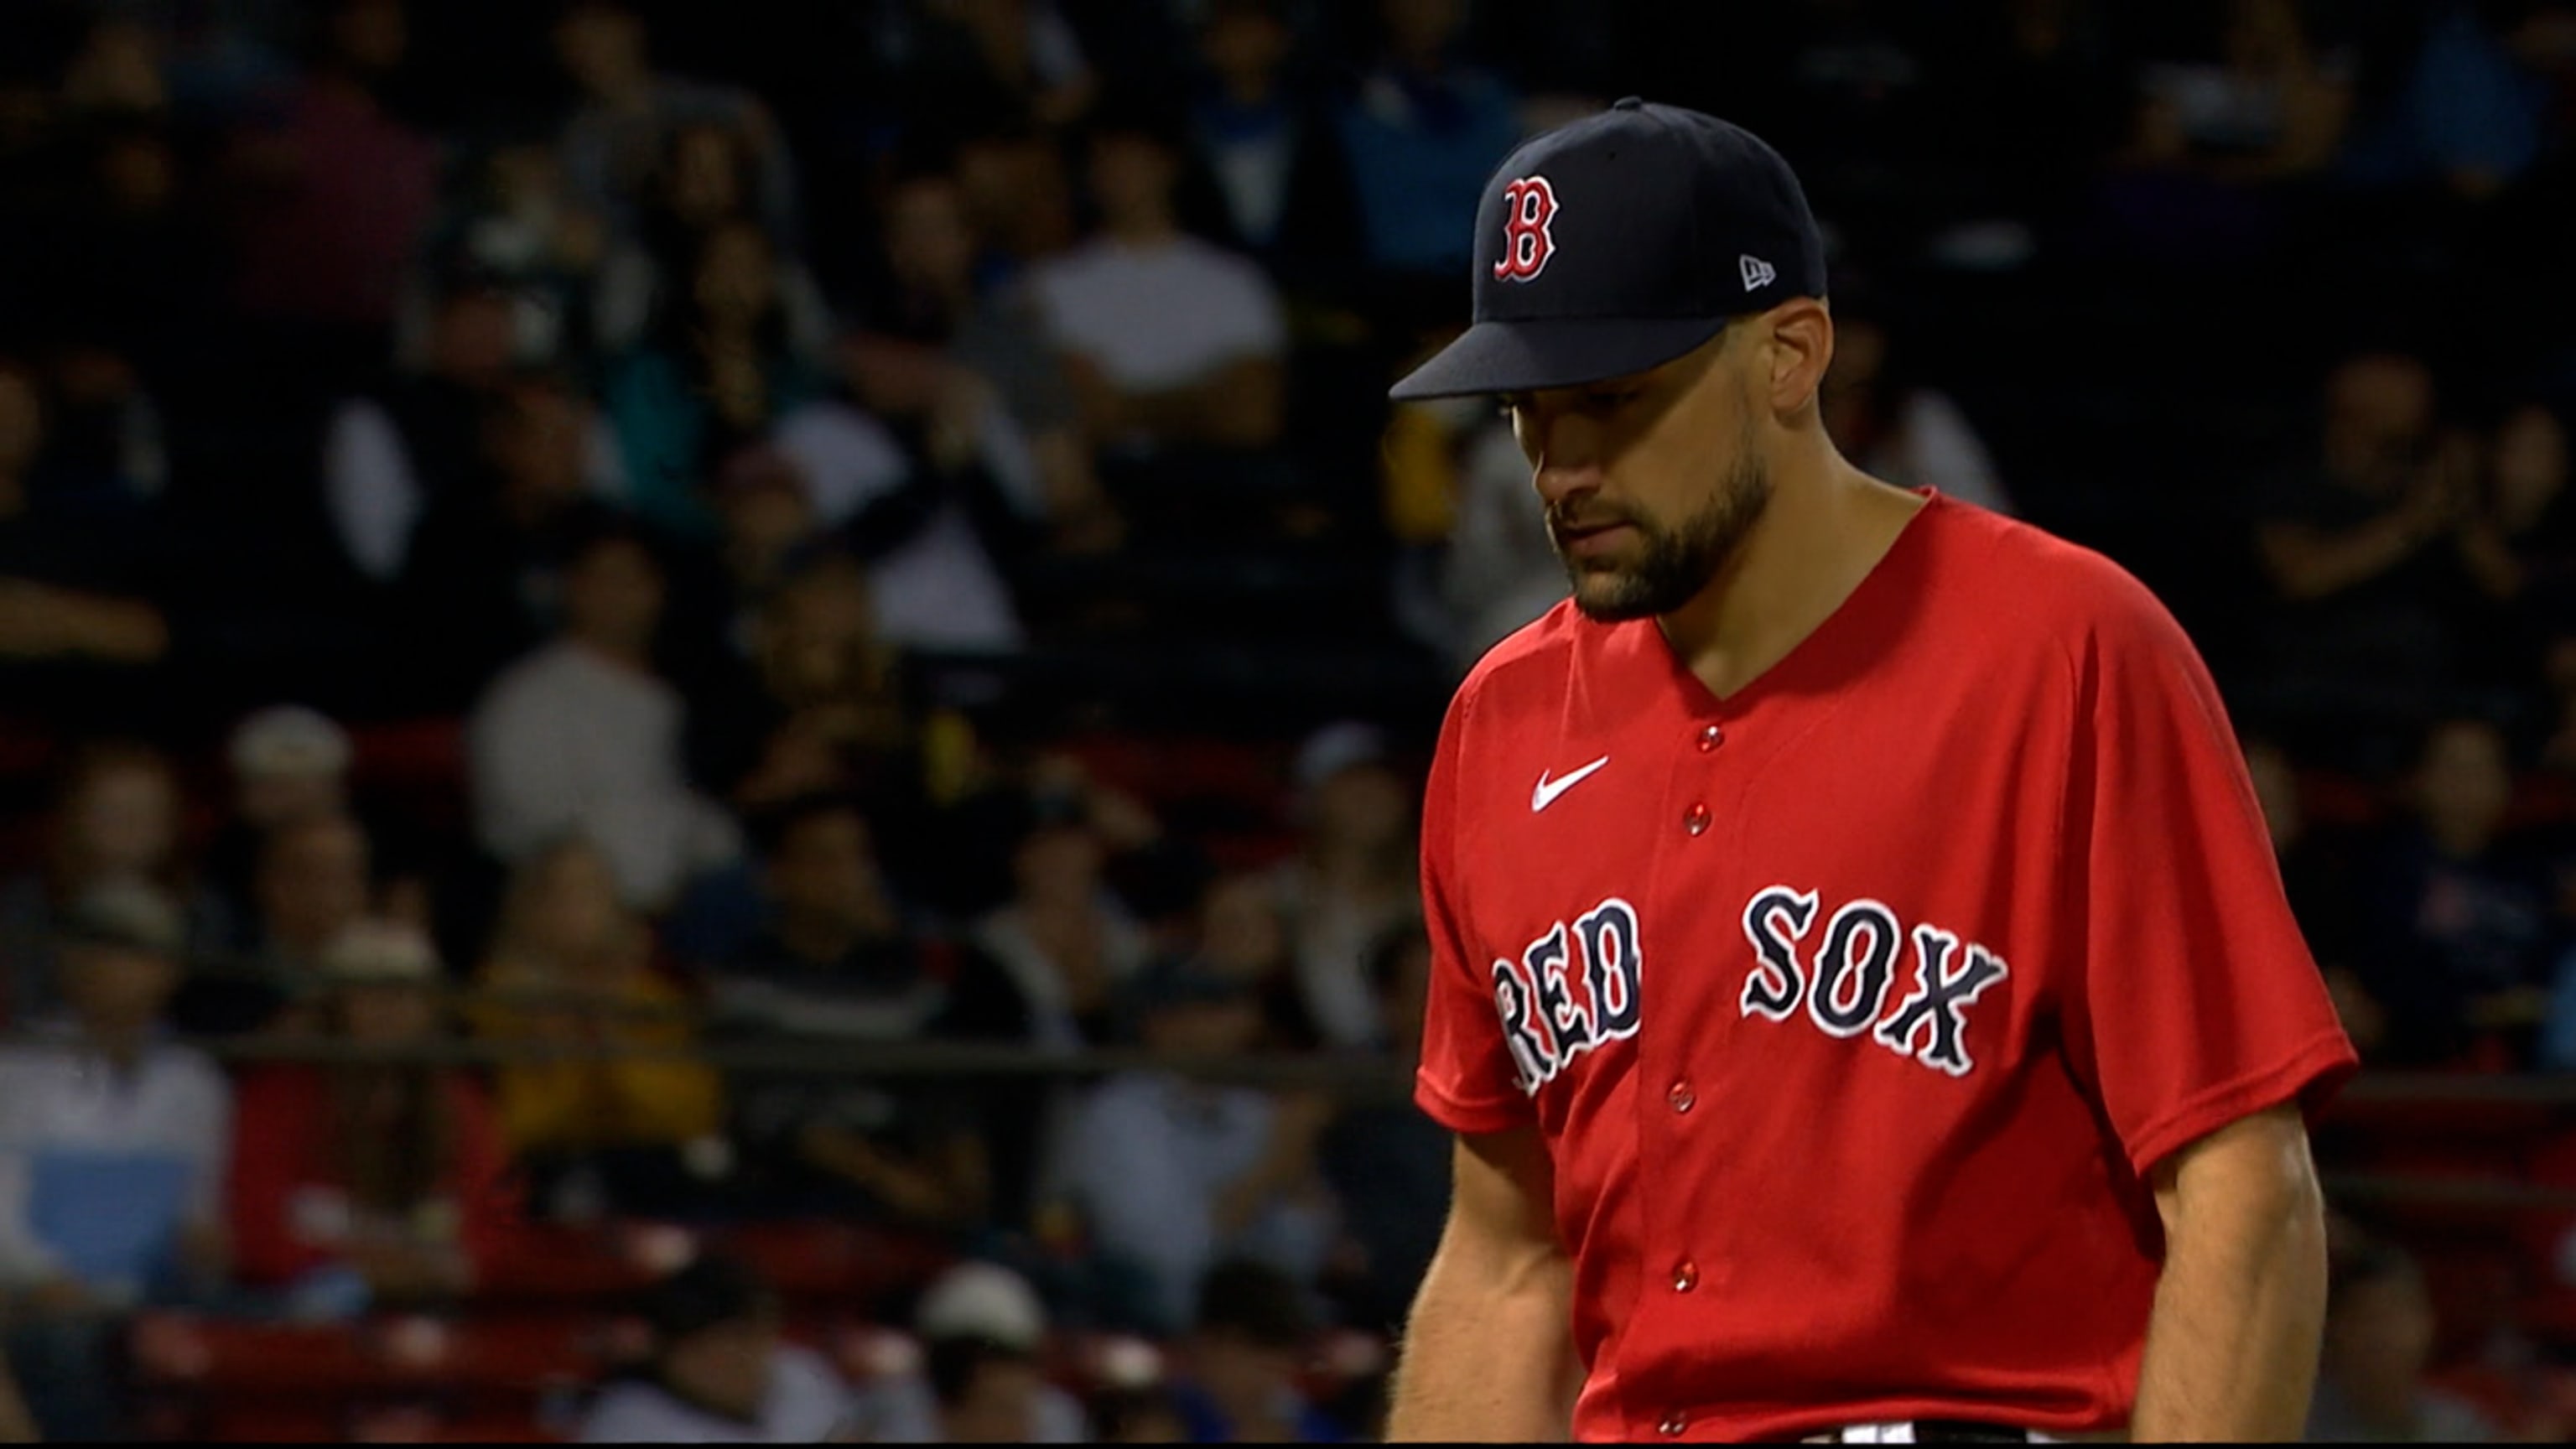 Boston Red Sox: Alex Cora should keep using Nathan Eovaldi in bullpen